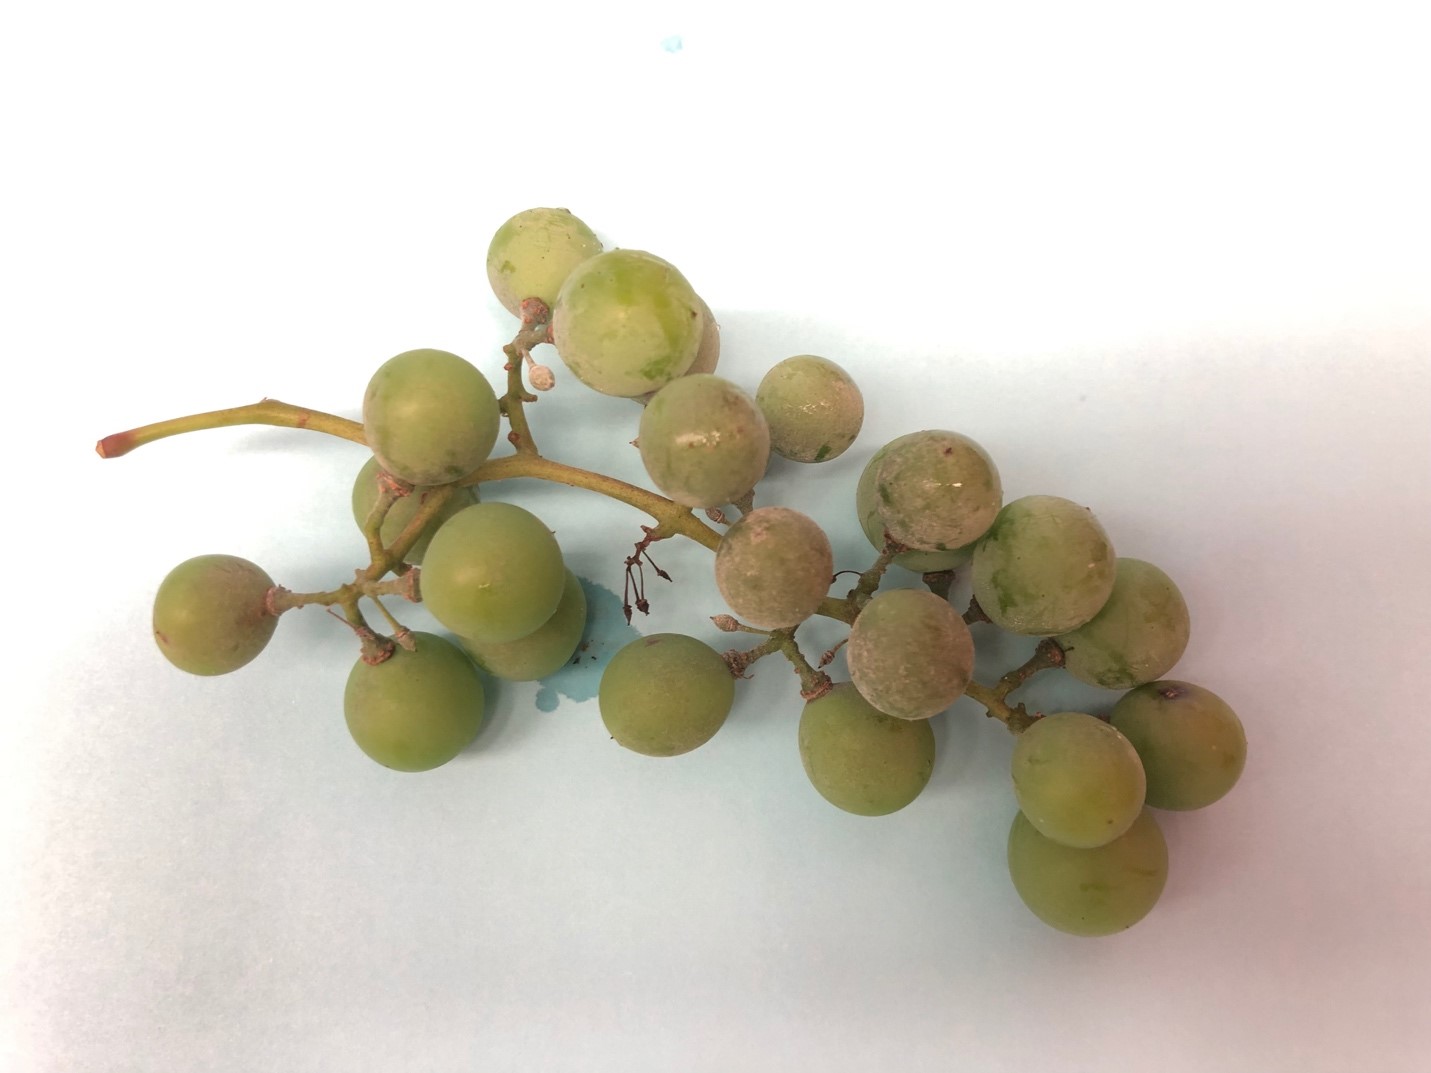 Powdery mildew on Concord grape clusters 